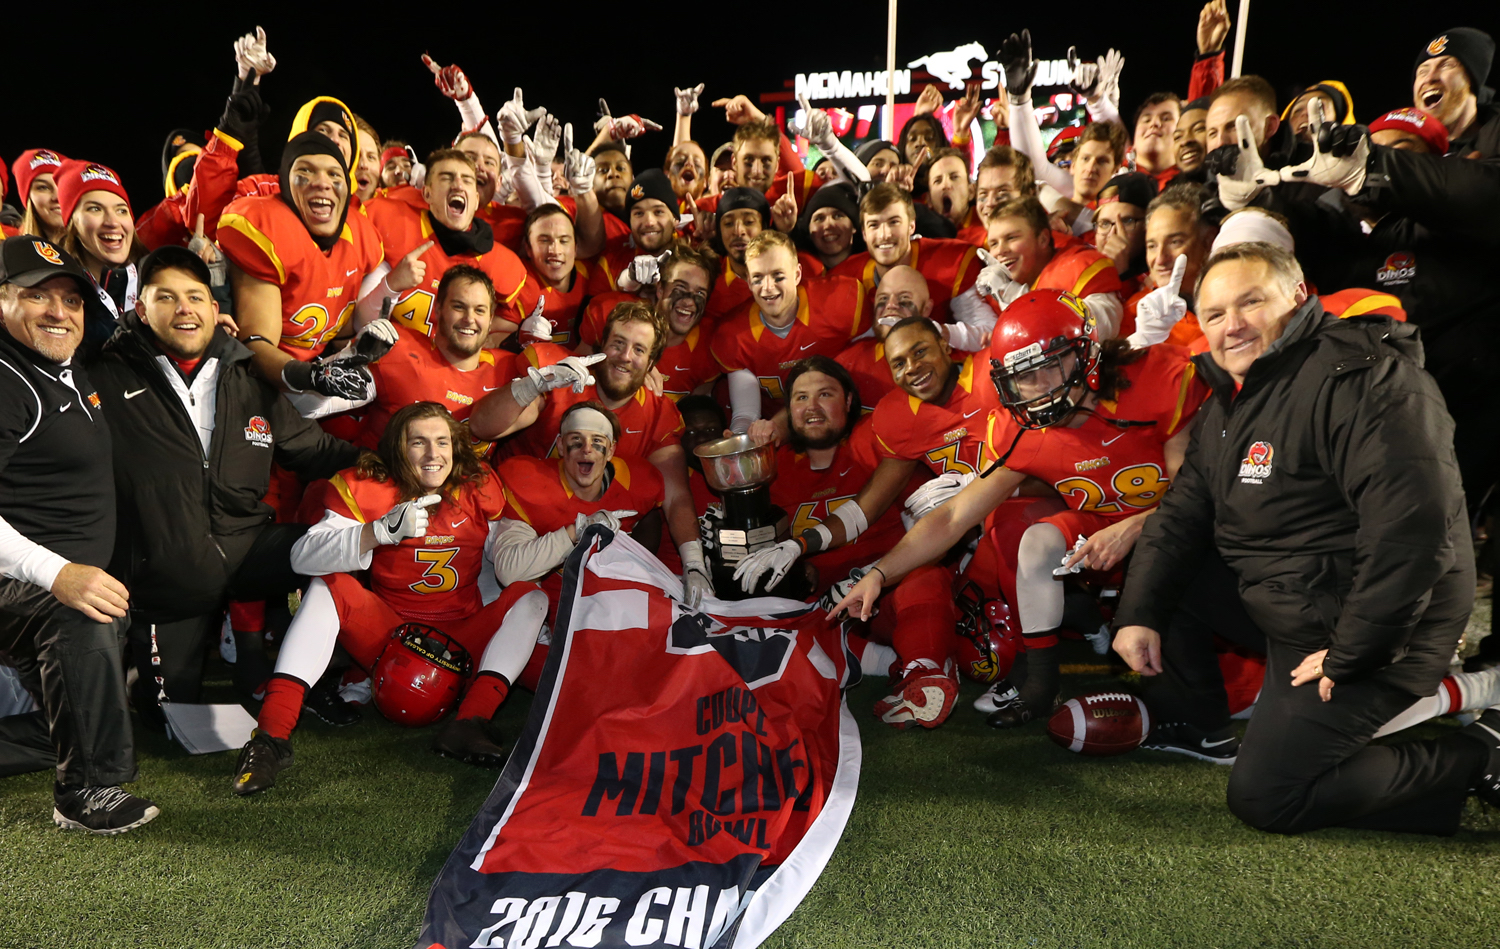 2016 U Sports ArcelorMittal Dofasco Mitchell Bowl: Underdahl sparks Calgary’s return to the Vanier Cup with a 50-24 win over StFX